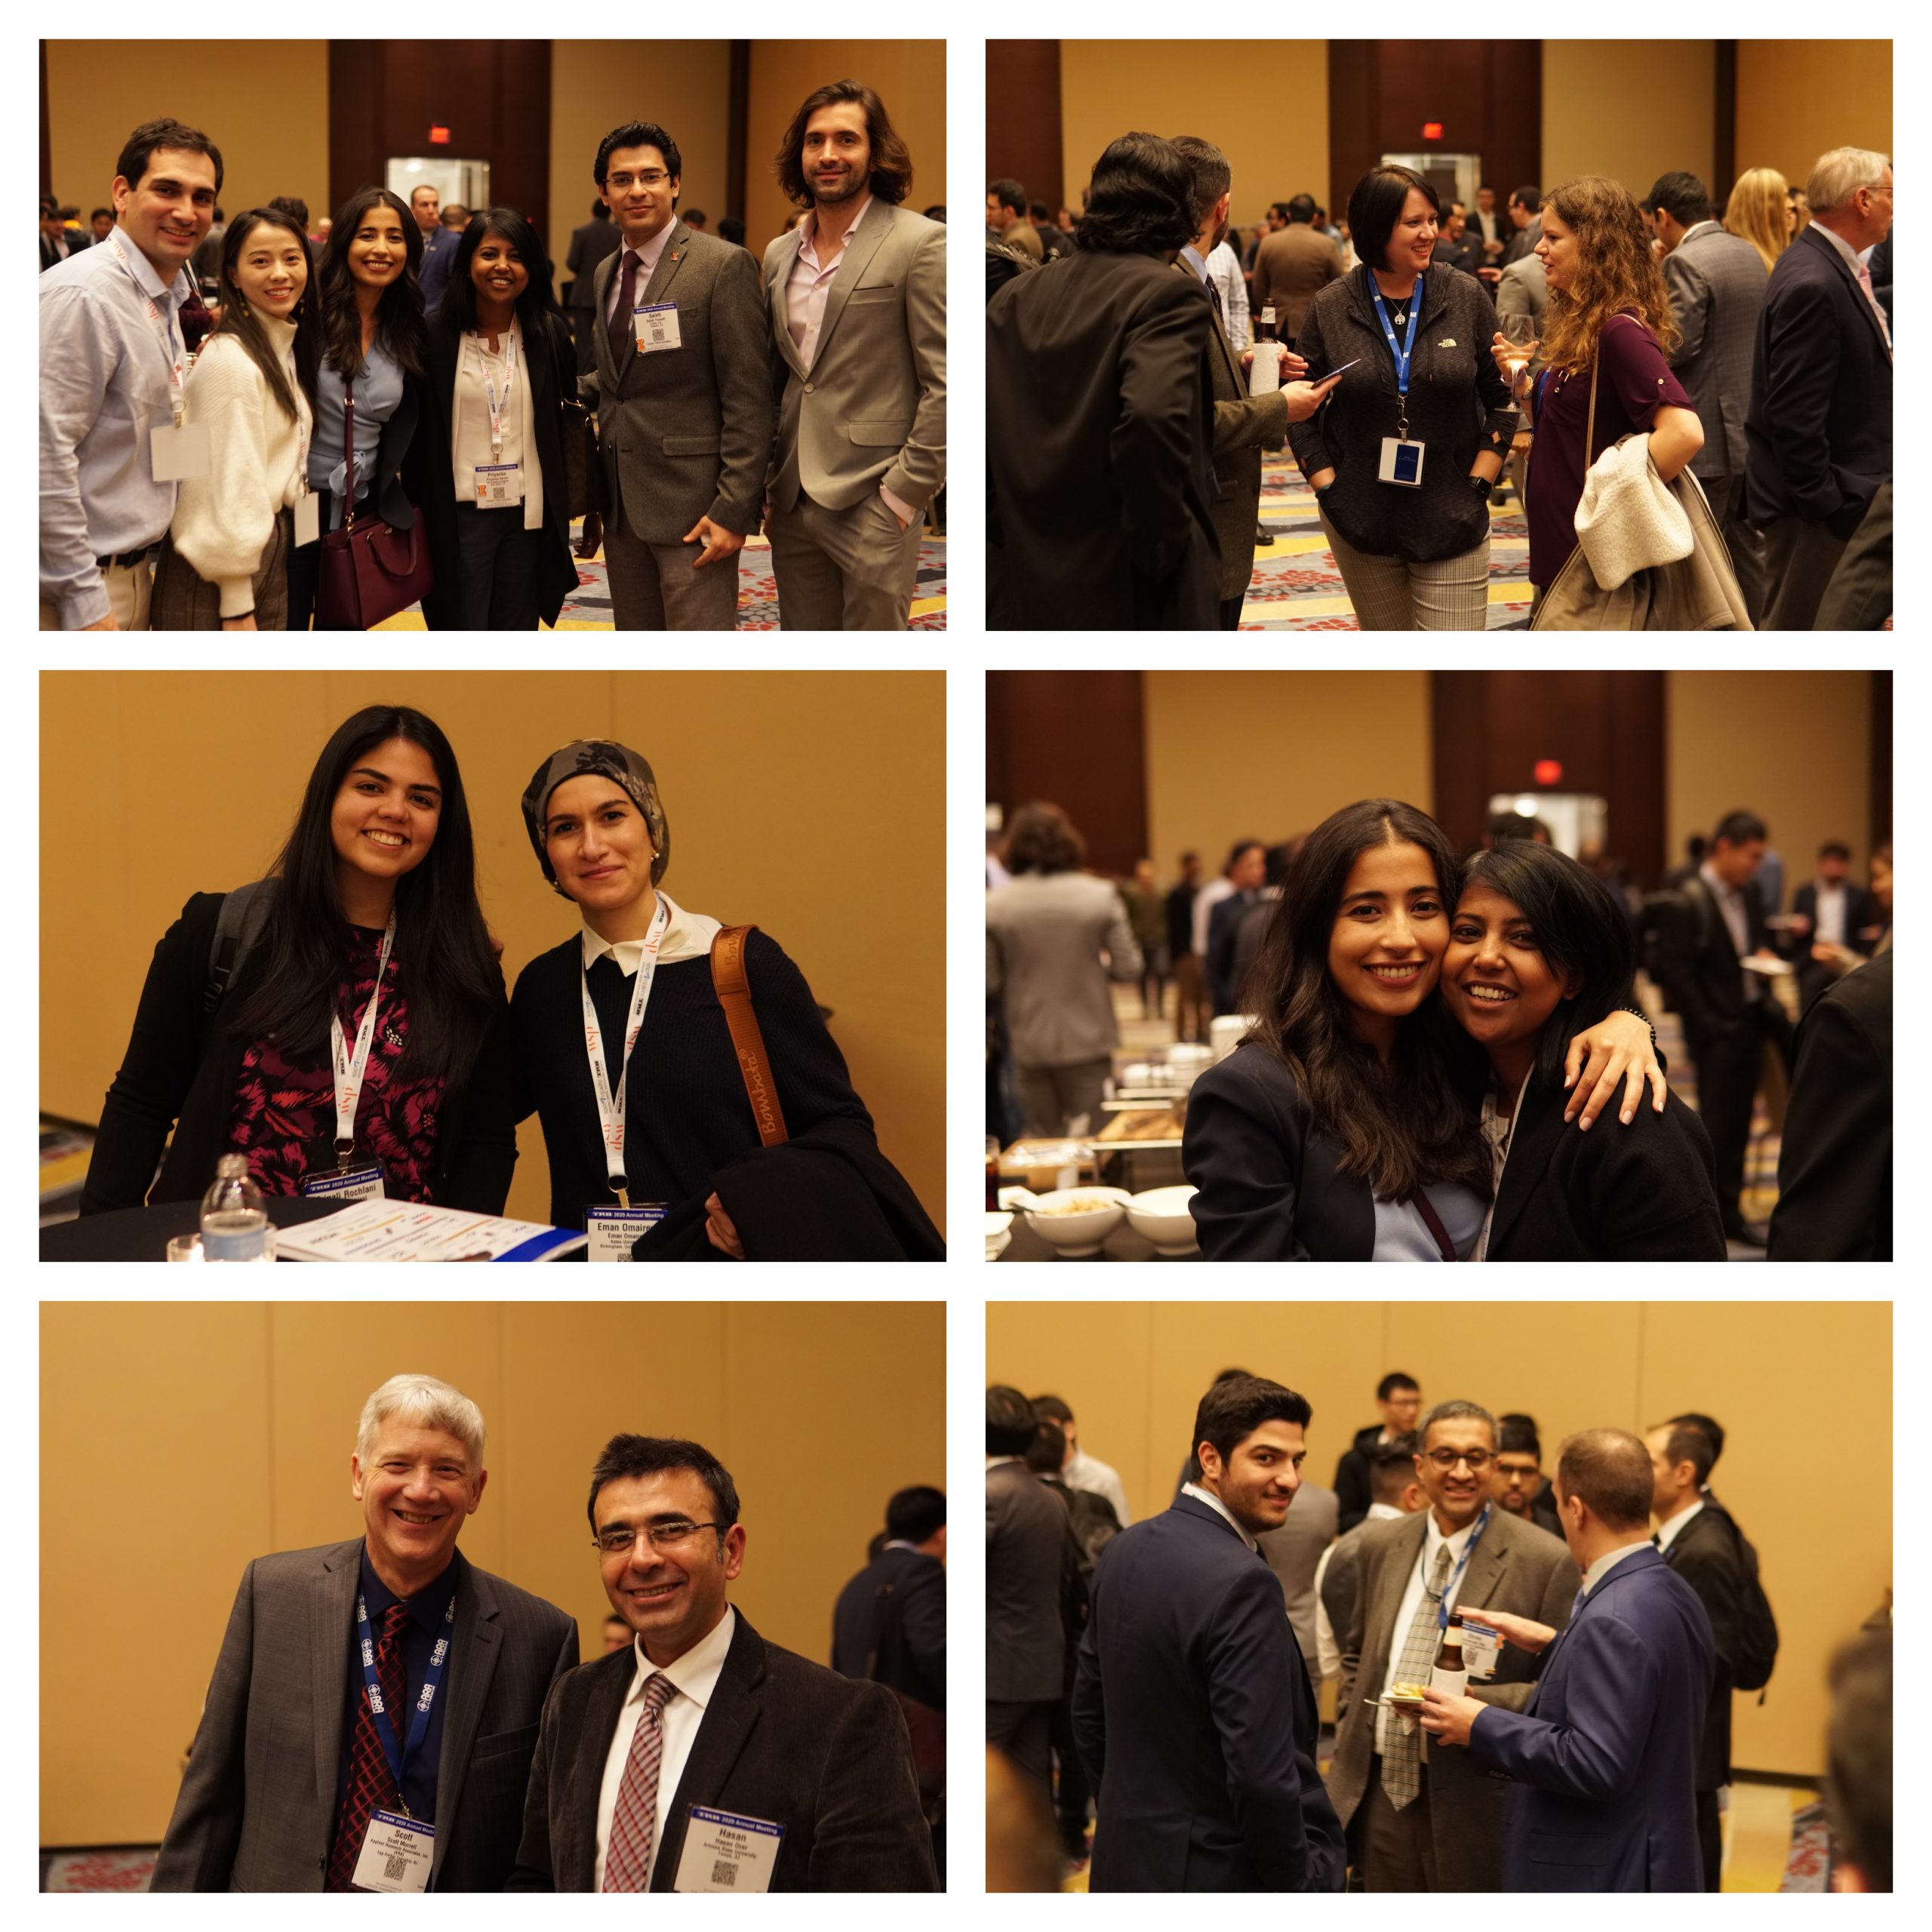 All smiles from University of Illinois at Urbana-Champaign alumni at the transportation group&rsquo;s reception on Sunday, Jan. 12, 2020, at the Marriott Marquis in Washington, D.C.